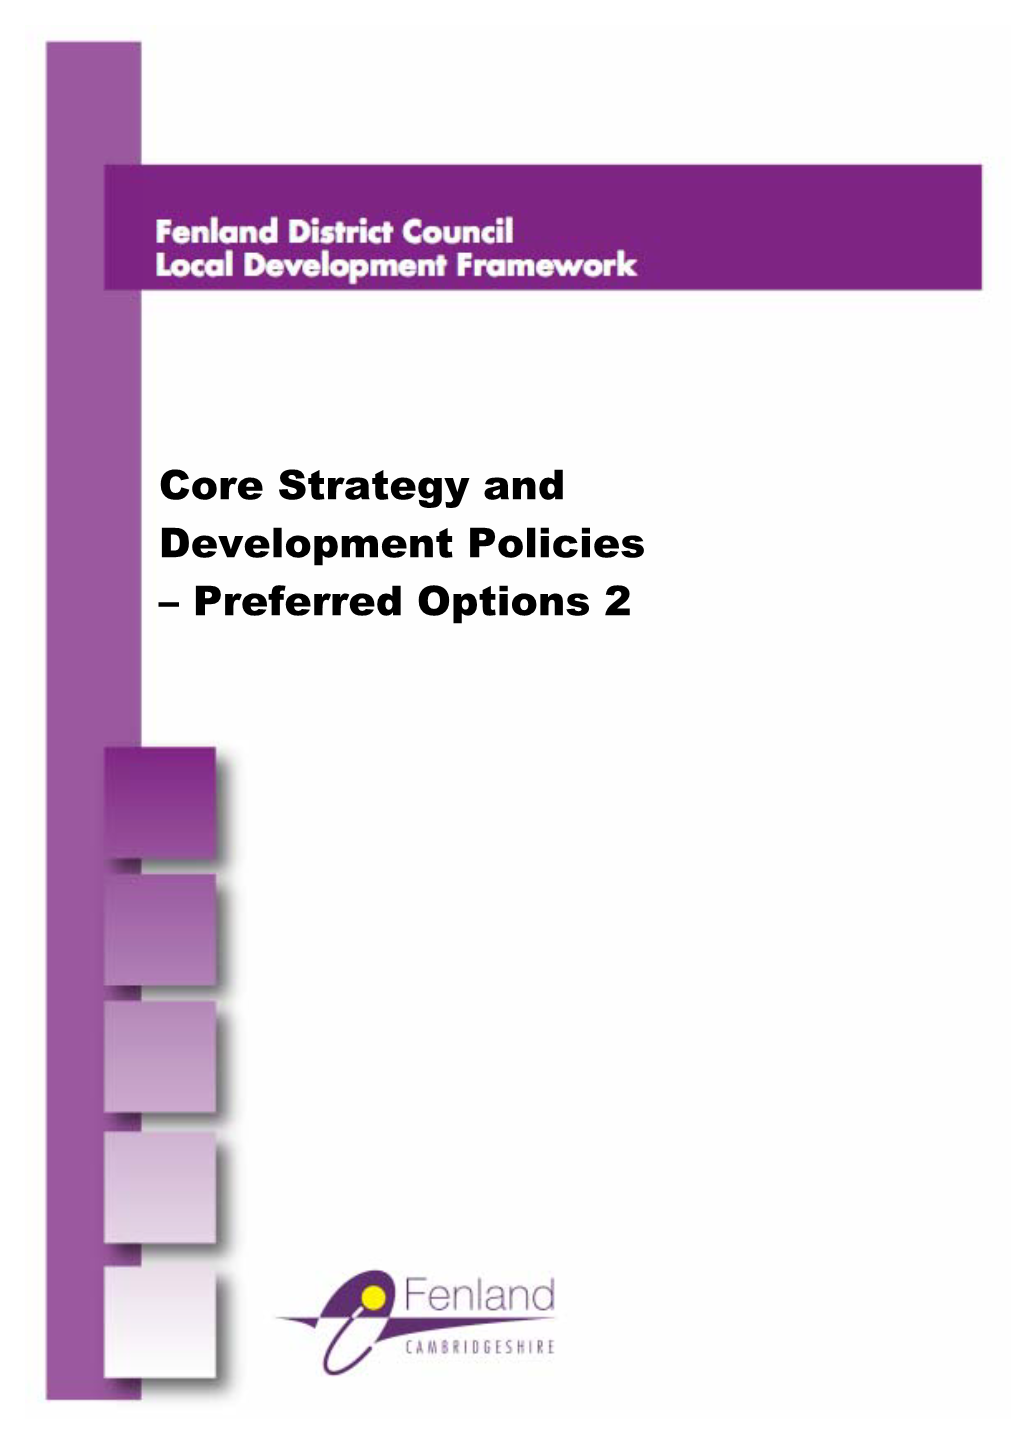 Core Strategy and Development Policies – Preferred Options 2